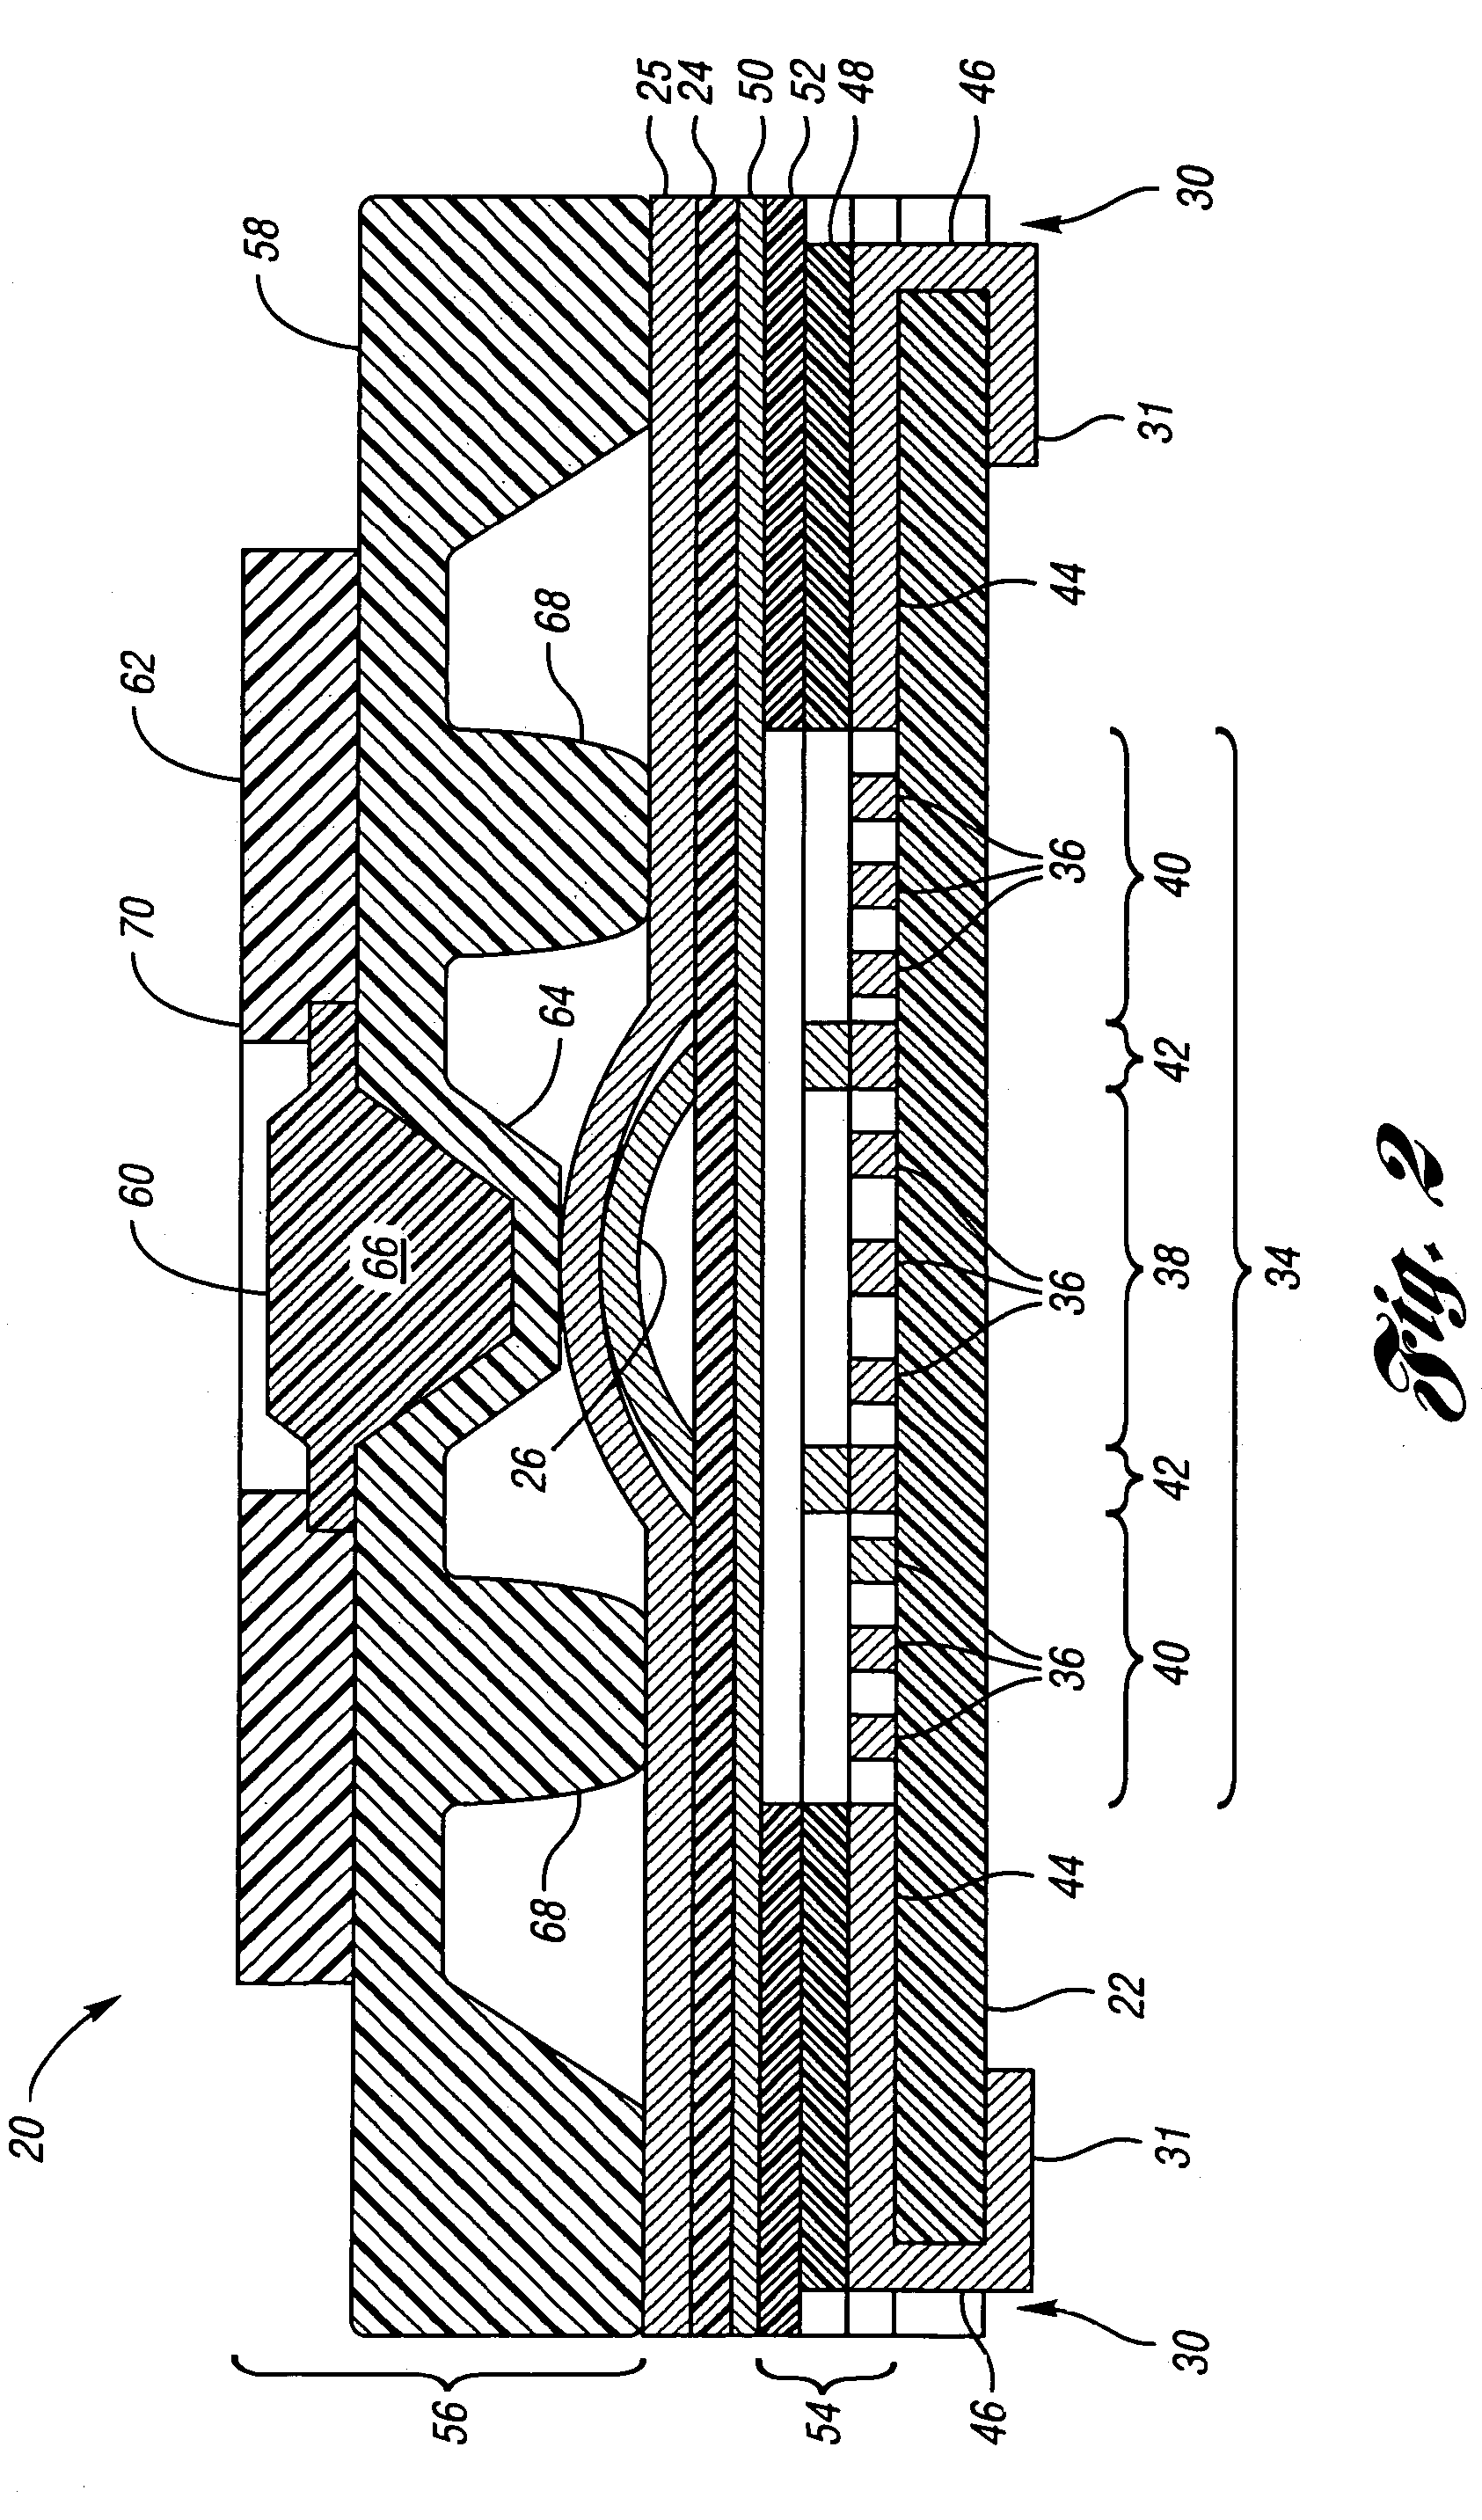 Force sensing pointing device with click function